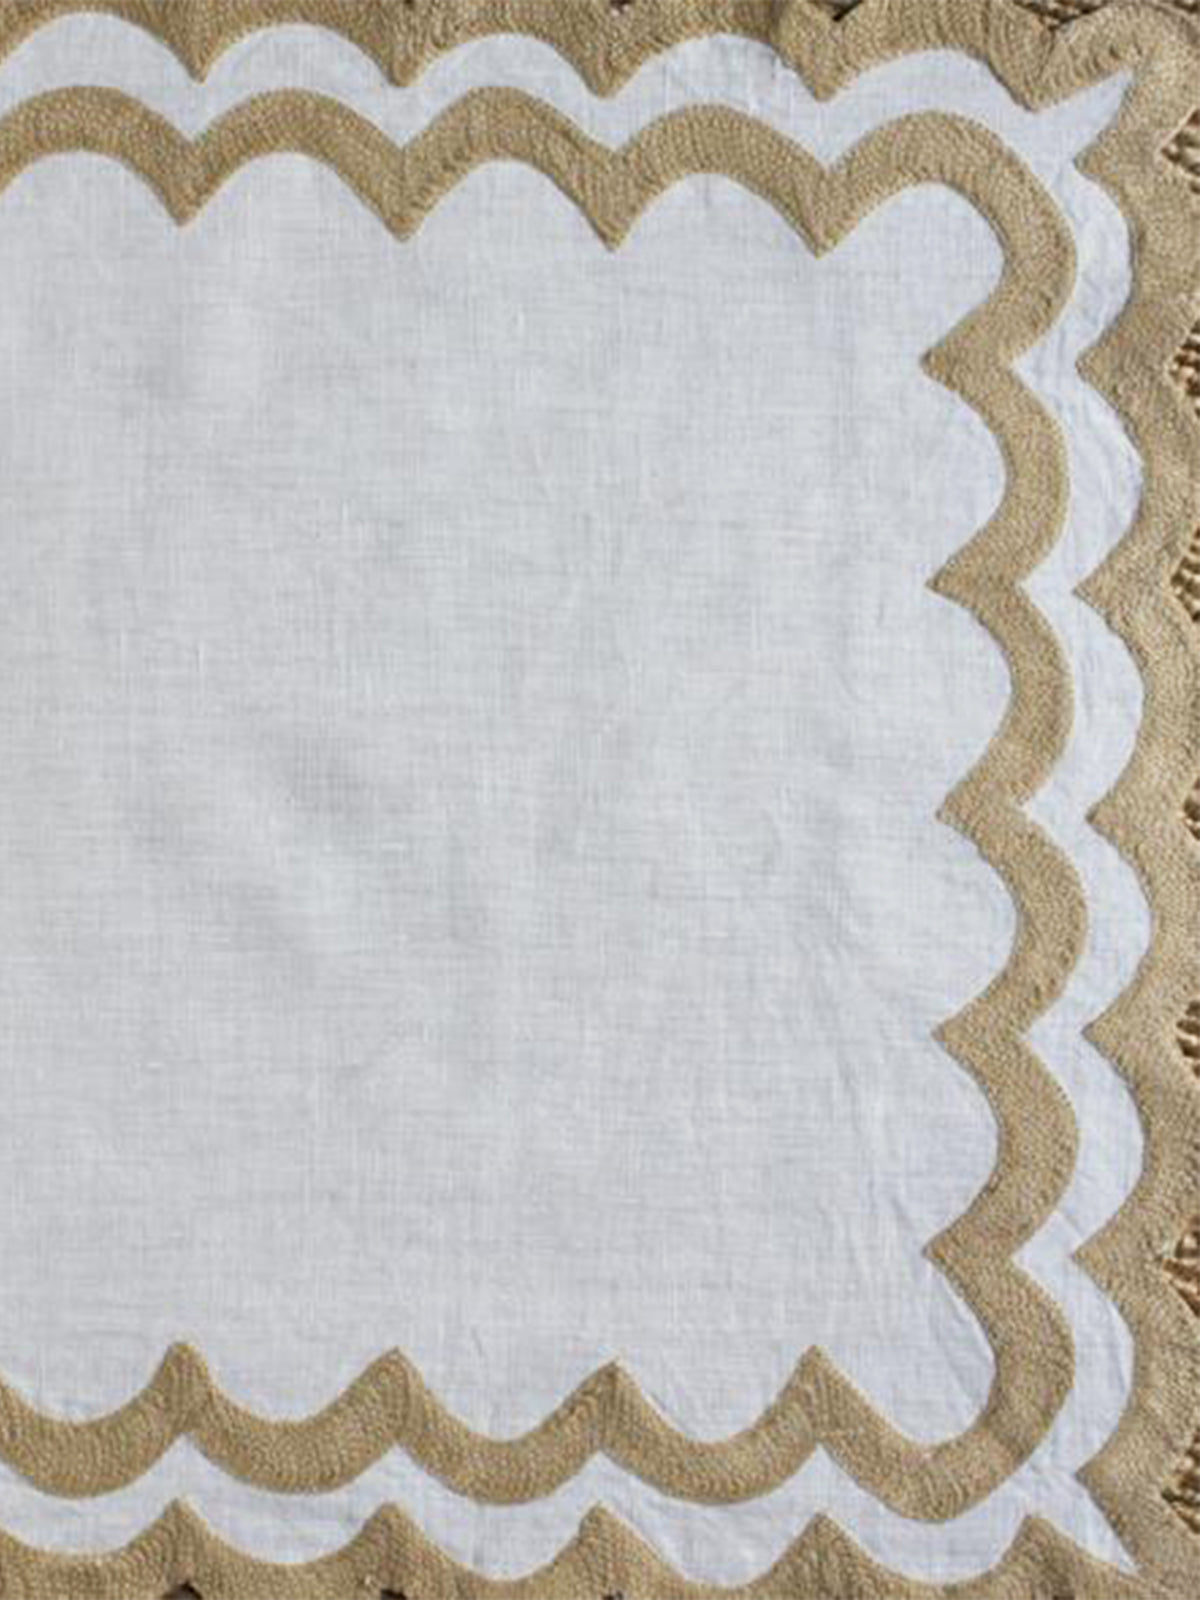 Scalloped Napkins in Sand - Set of Four